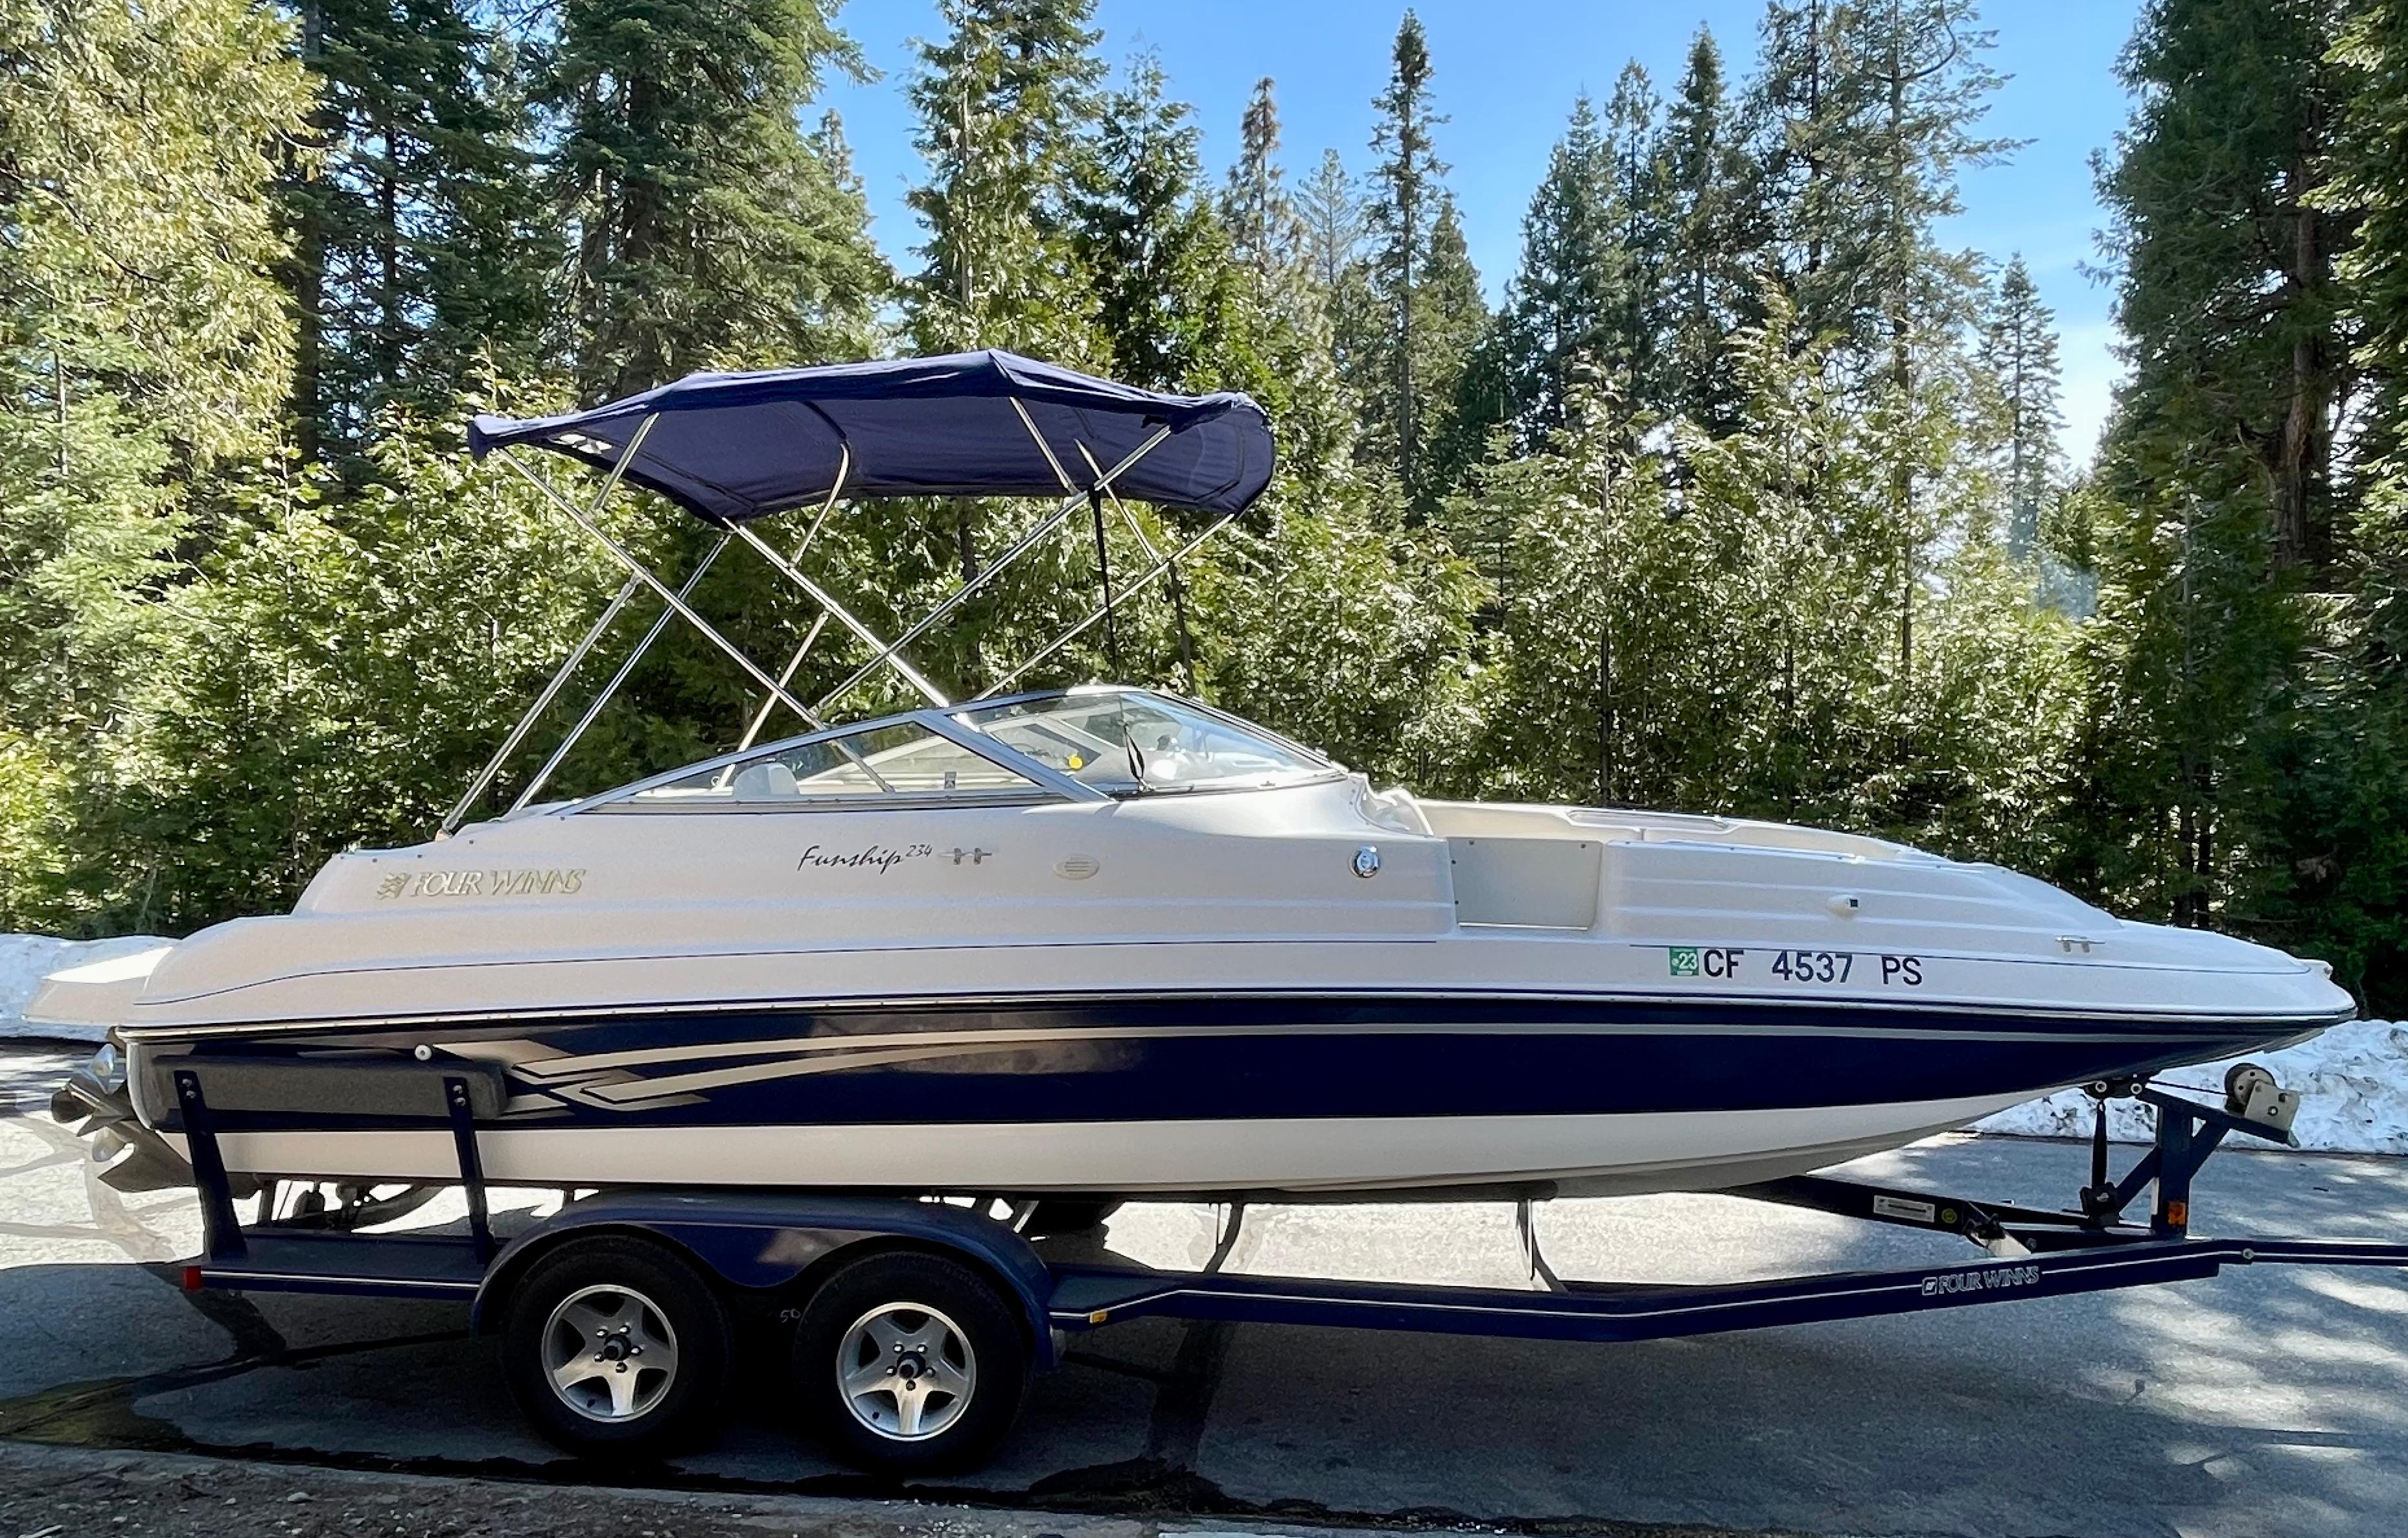 Explore Four Winns 210 Ss Horizon Boats For Sale - Boat Trader